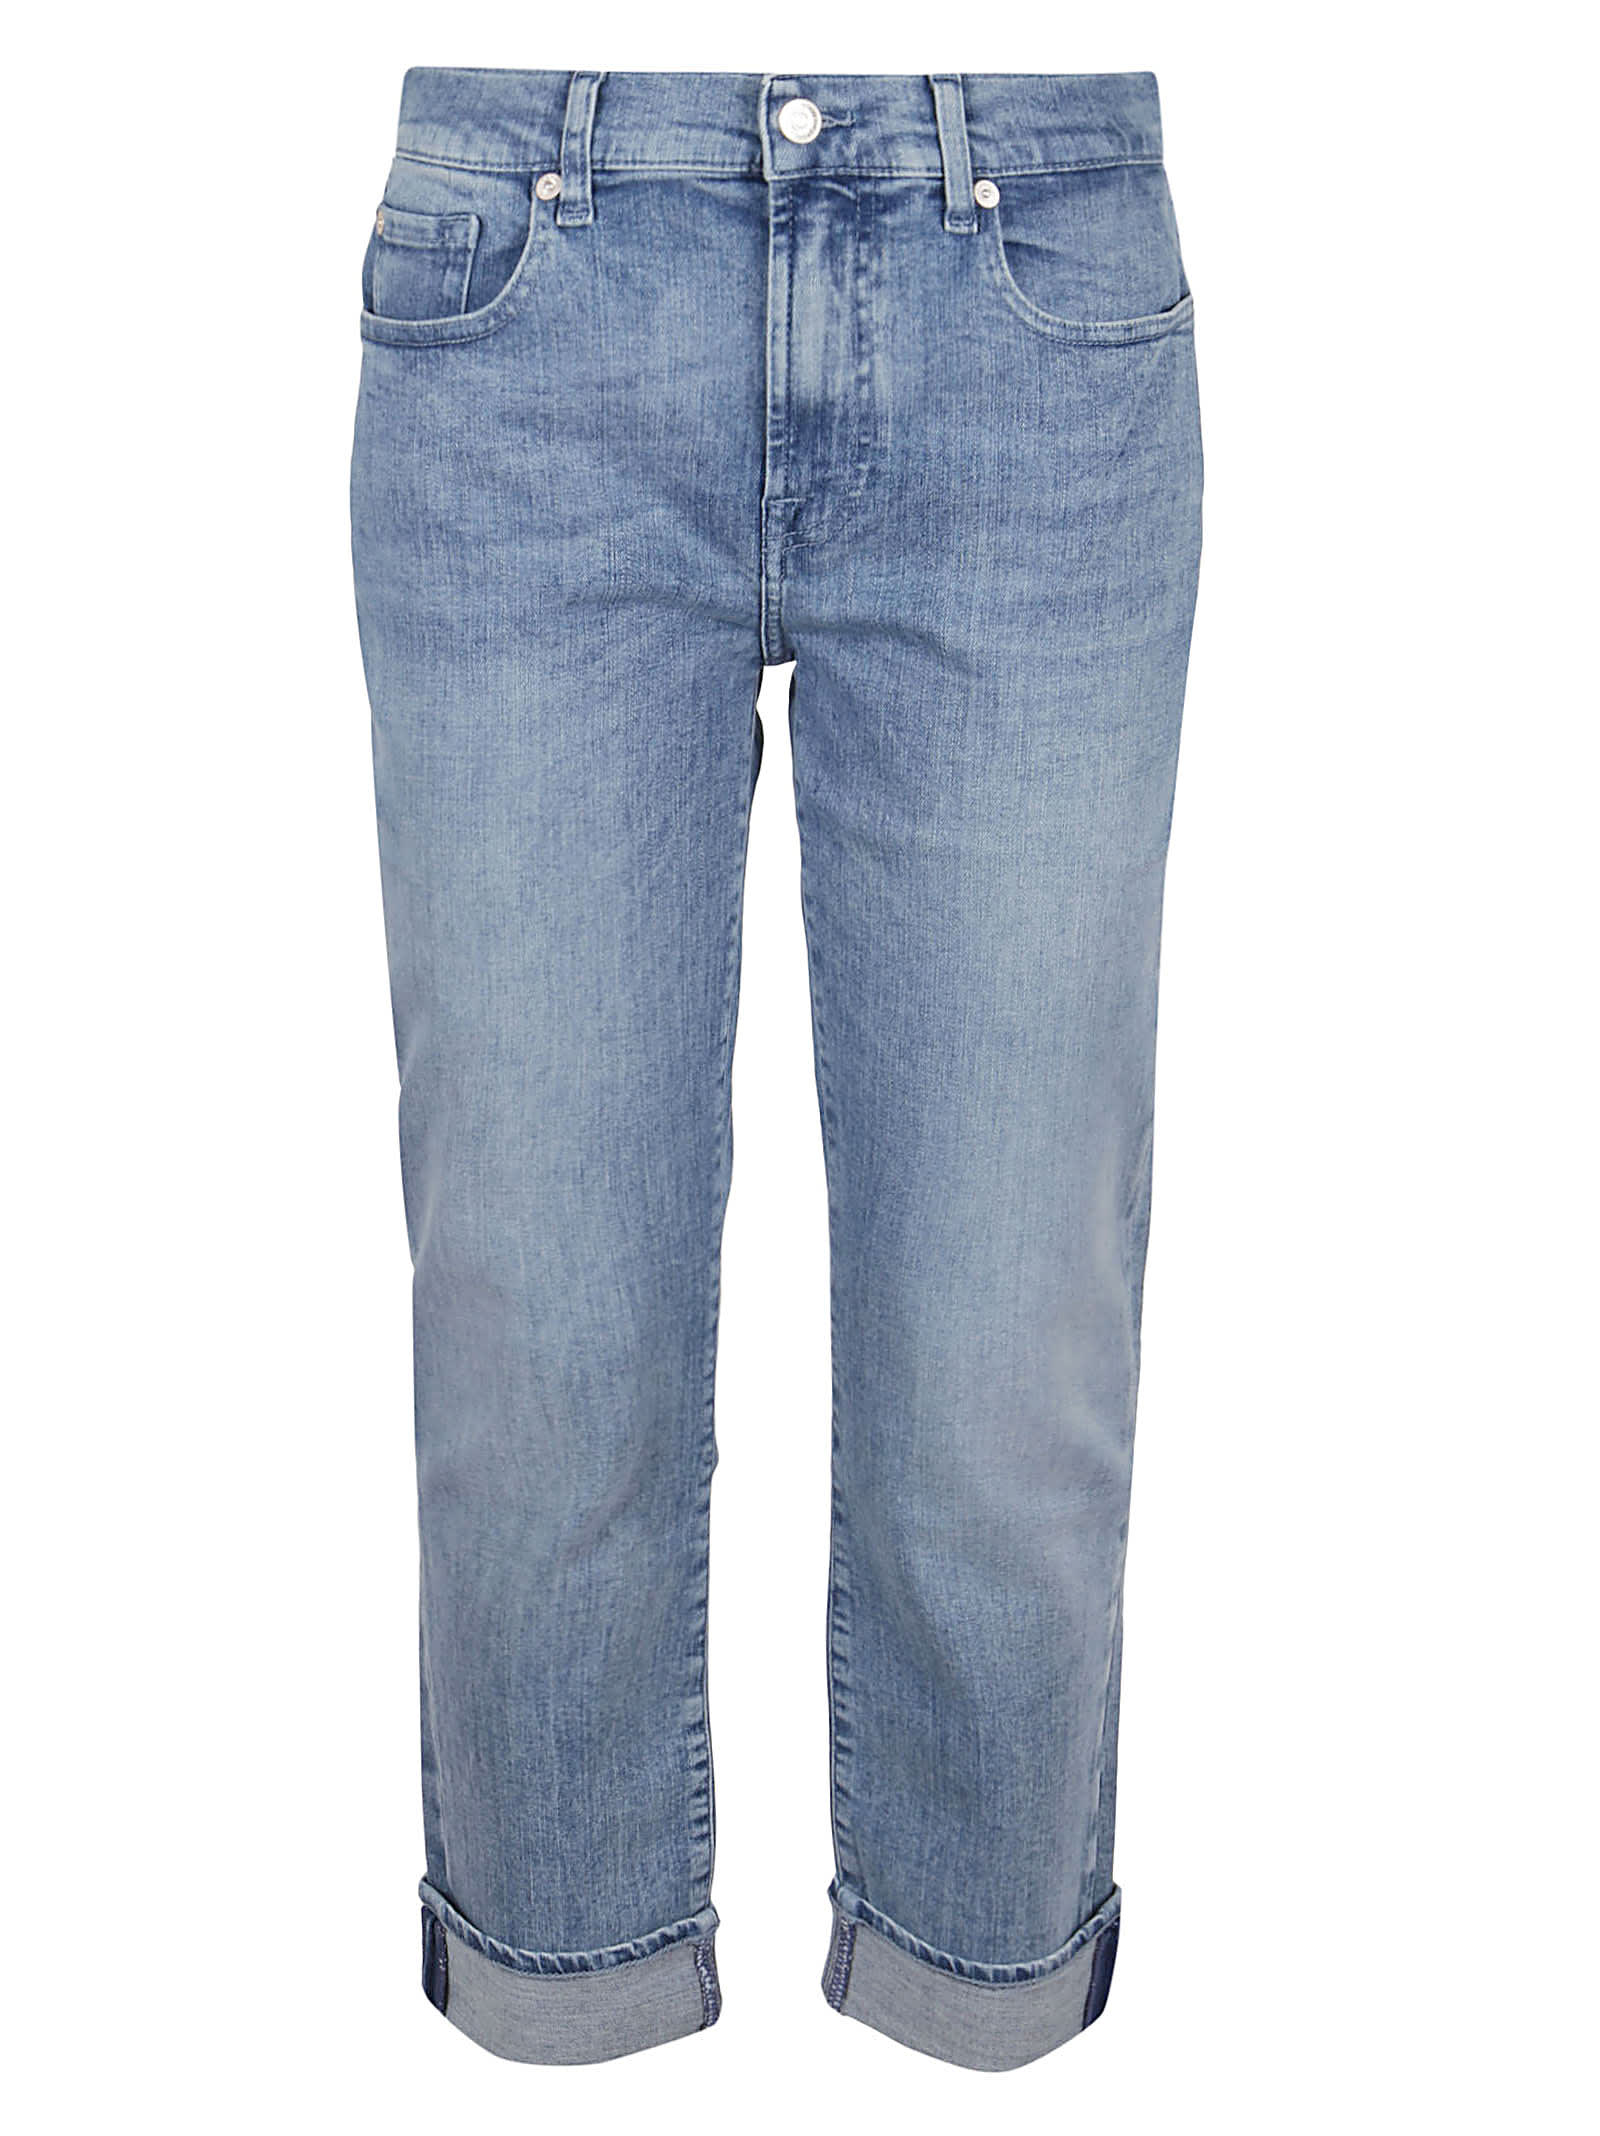 7 For All Mankind Relaxed Skinny Slim Illusion